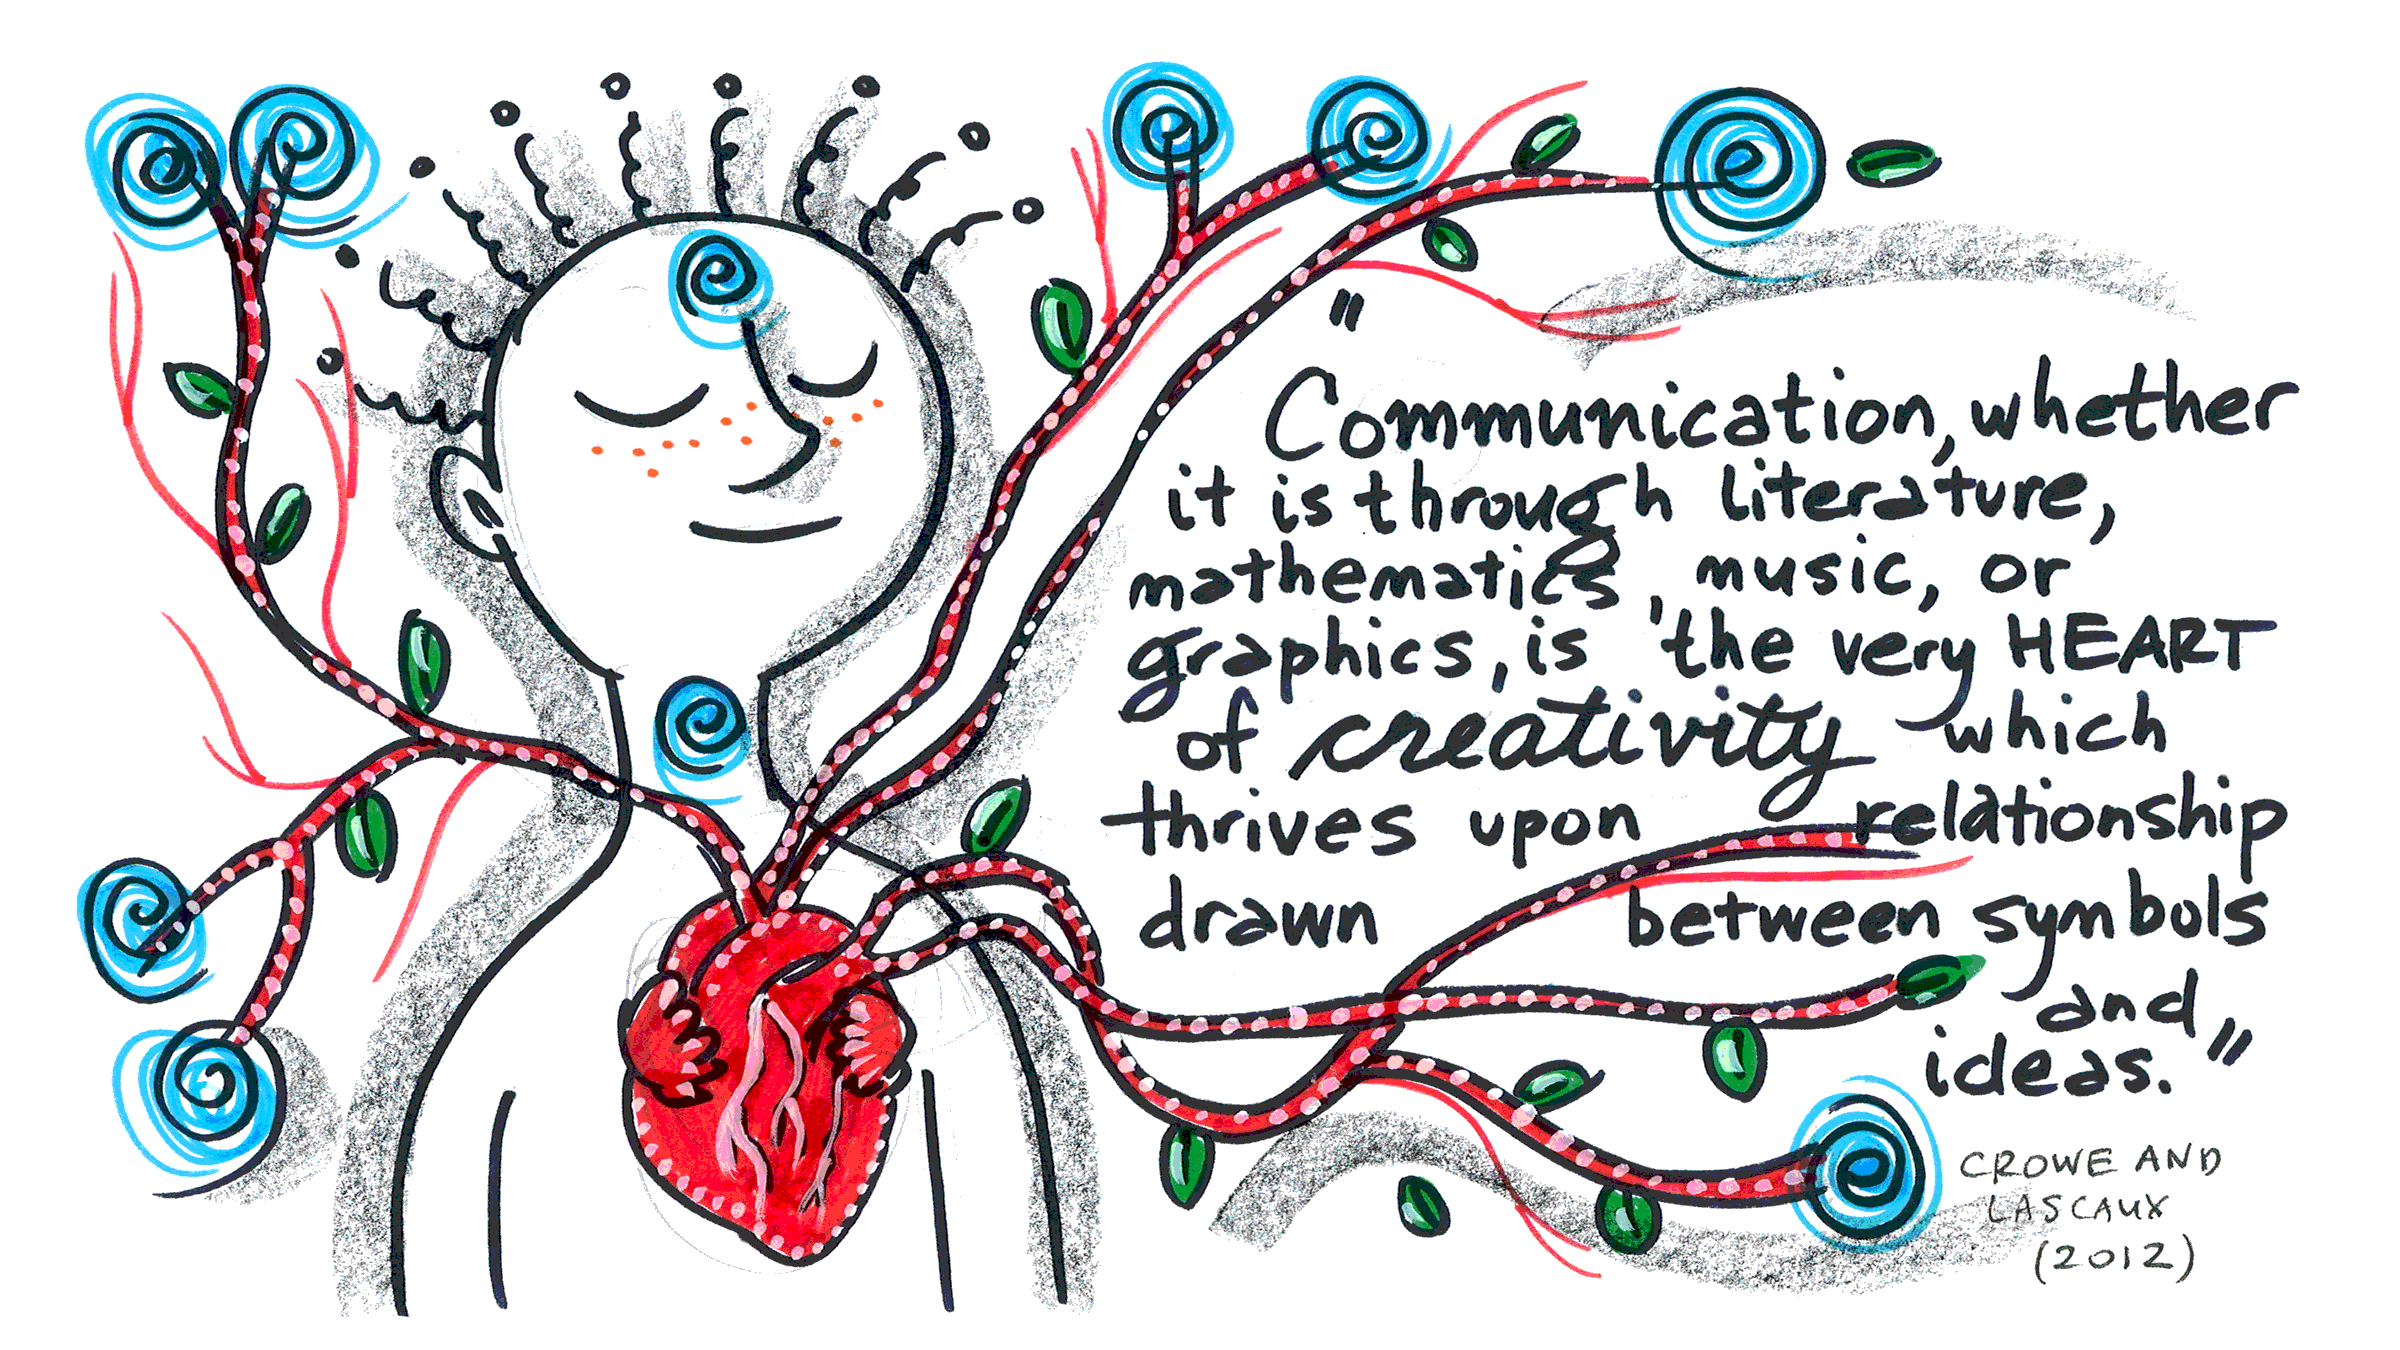 “Communication, whether it is through literature, mathematics, music, or graphics, is the very heart of creativity which thrives upon relationship drawn between symbols and ideas.”